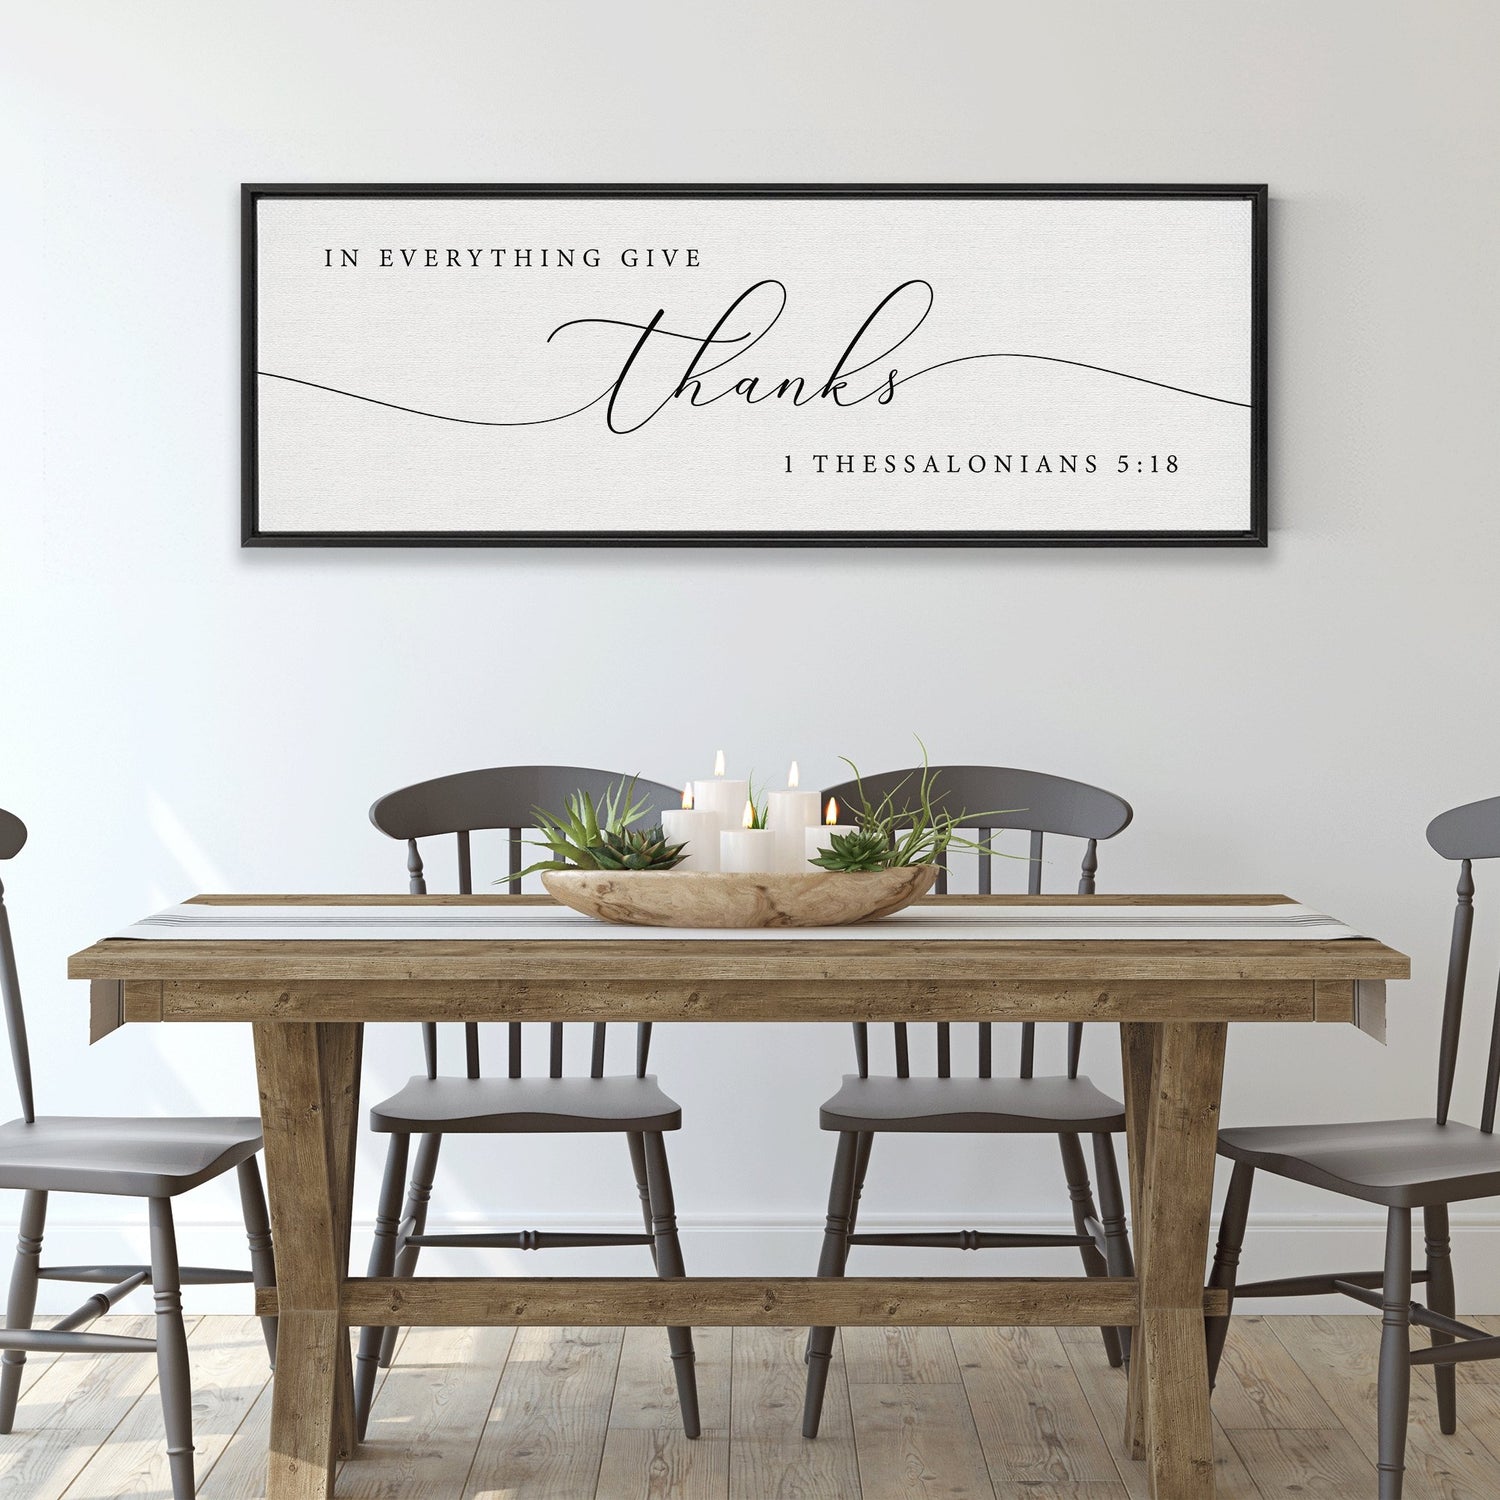 In Everything Give Thanks | 1 Thessalonians 5:18 | Bible Verse Wall Art - Forever Written